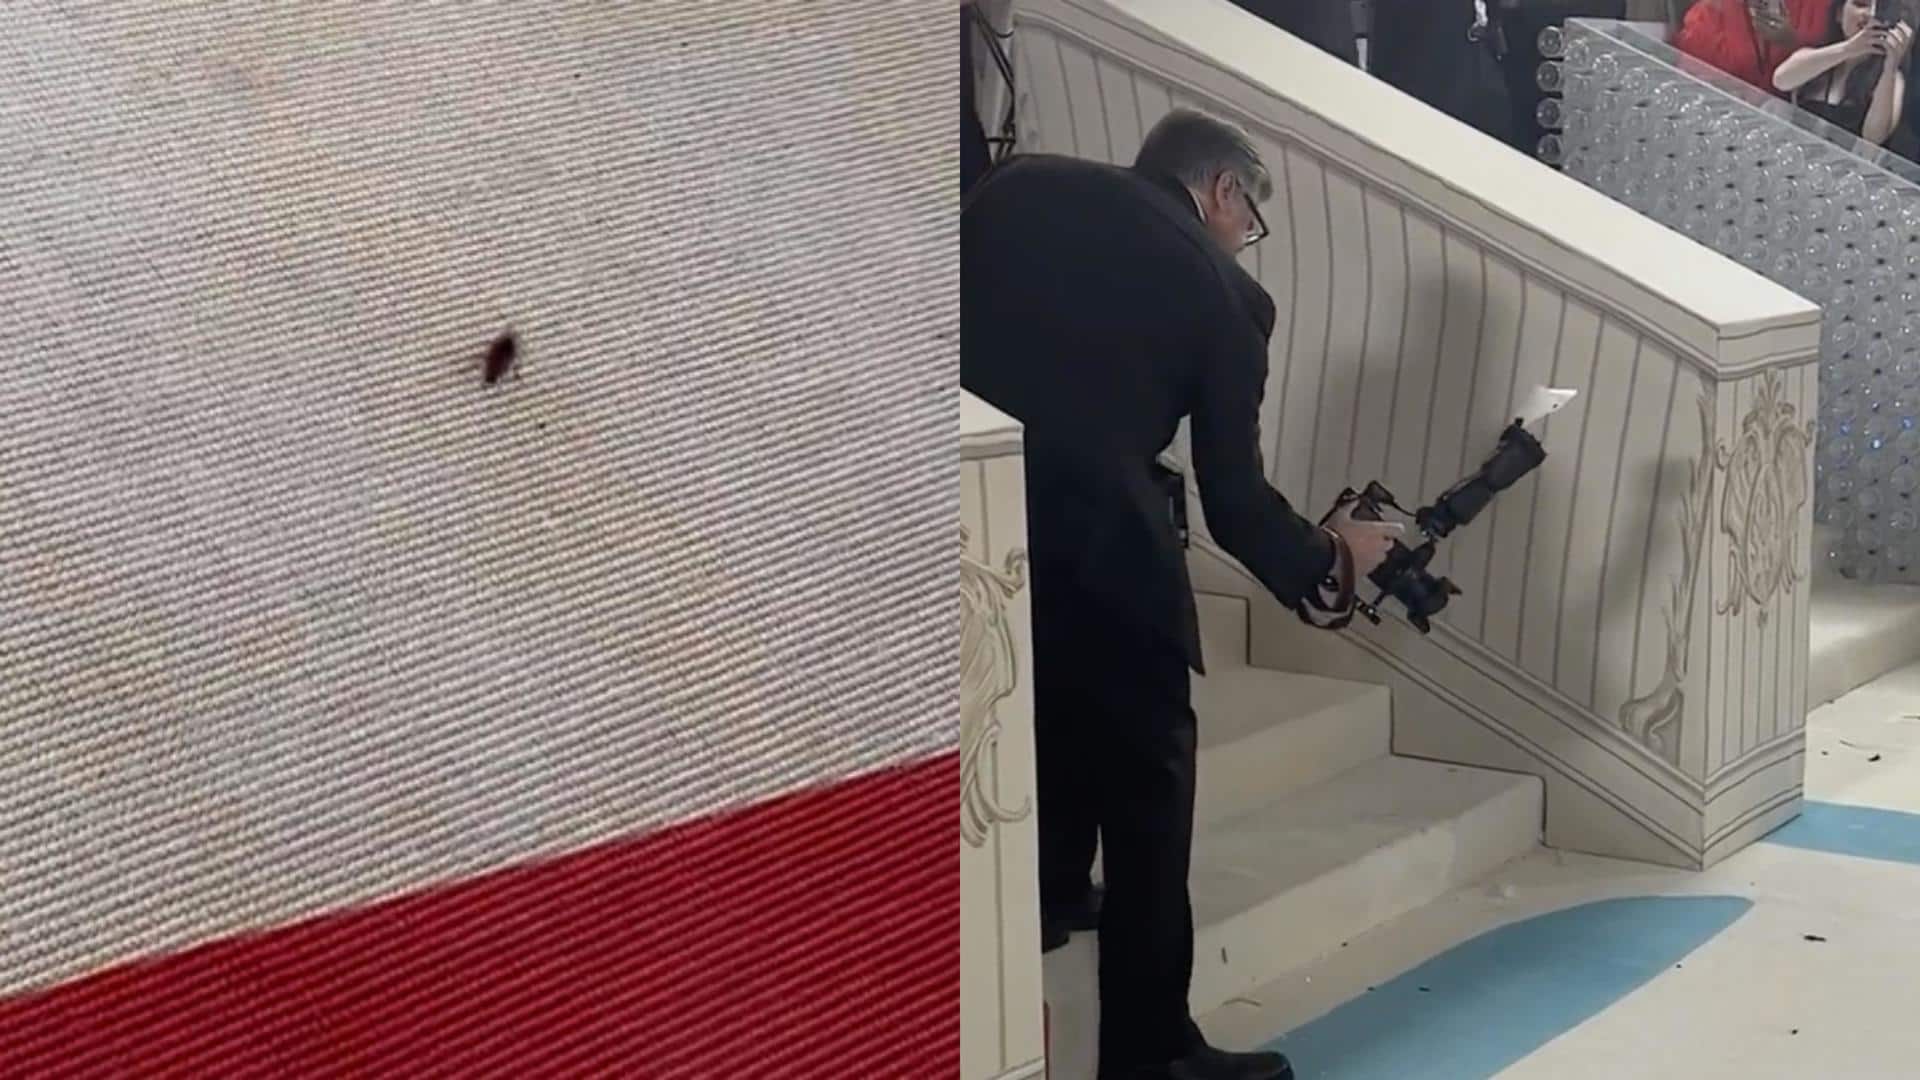 #MetGala2023: Cockroach spotted on red carpet, netizens say 'best dressed'